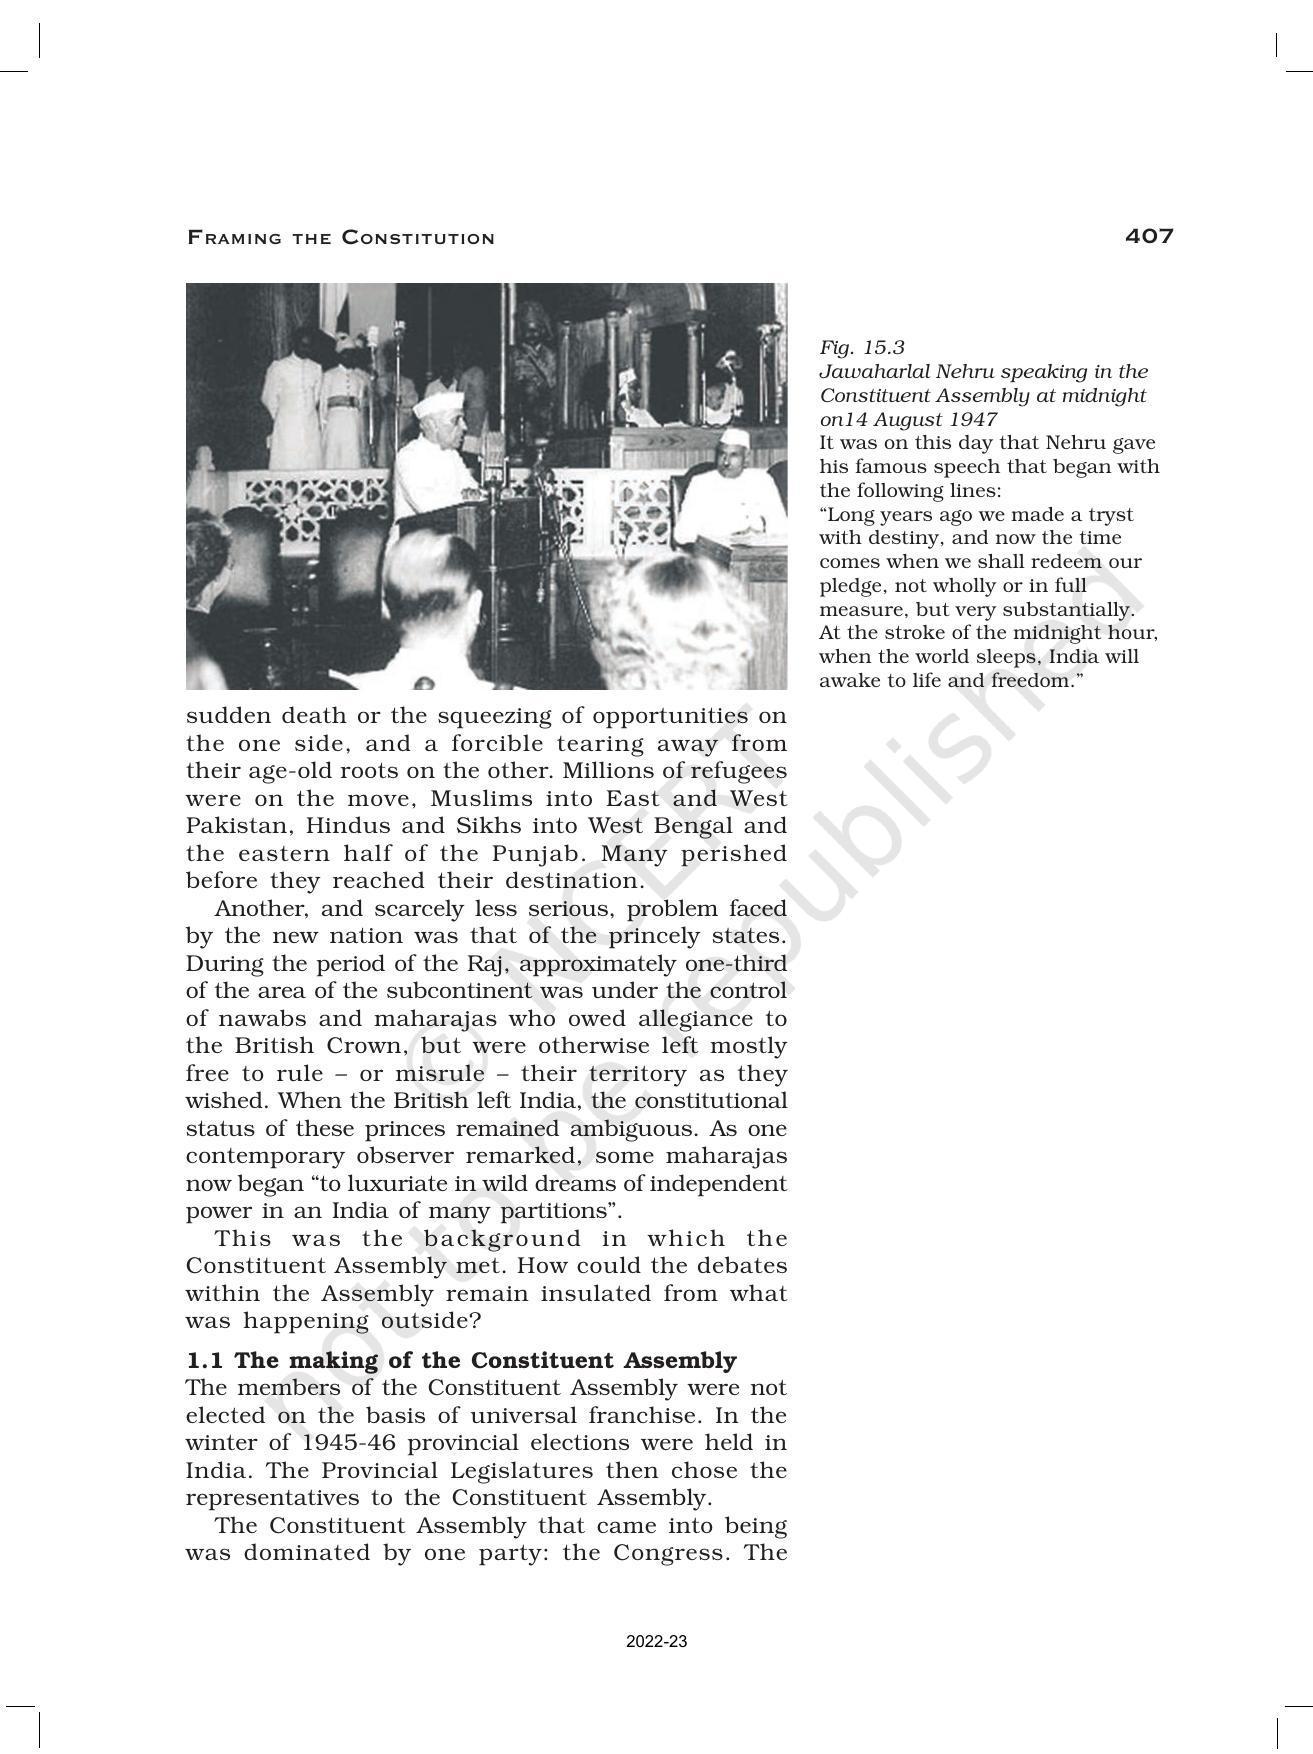 NCERT Book for Class 12 History (Part-III) Chapter 15 Framing and the Constitution - Page 3